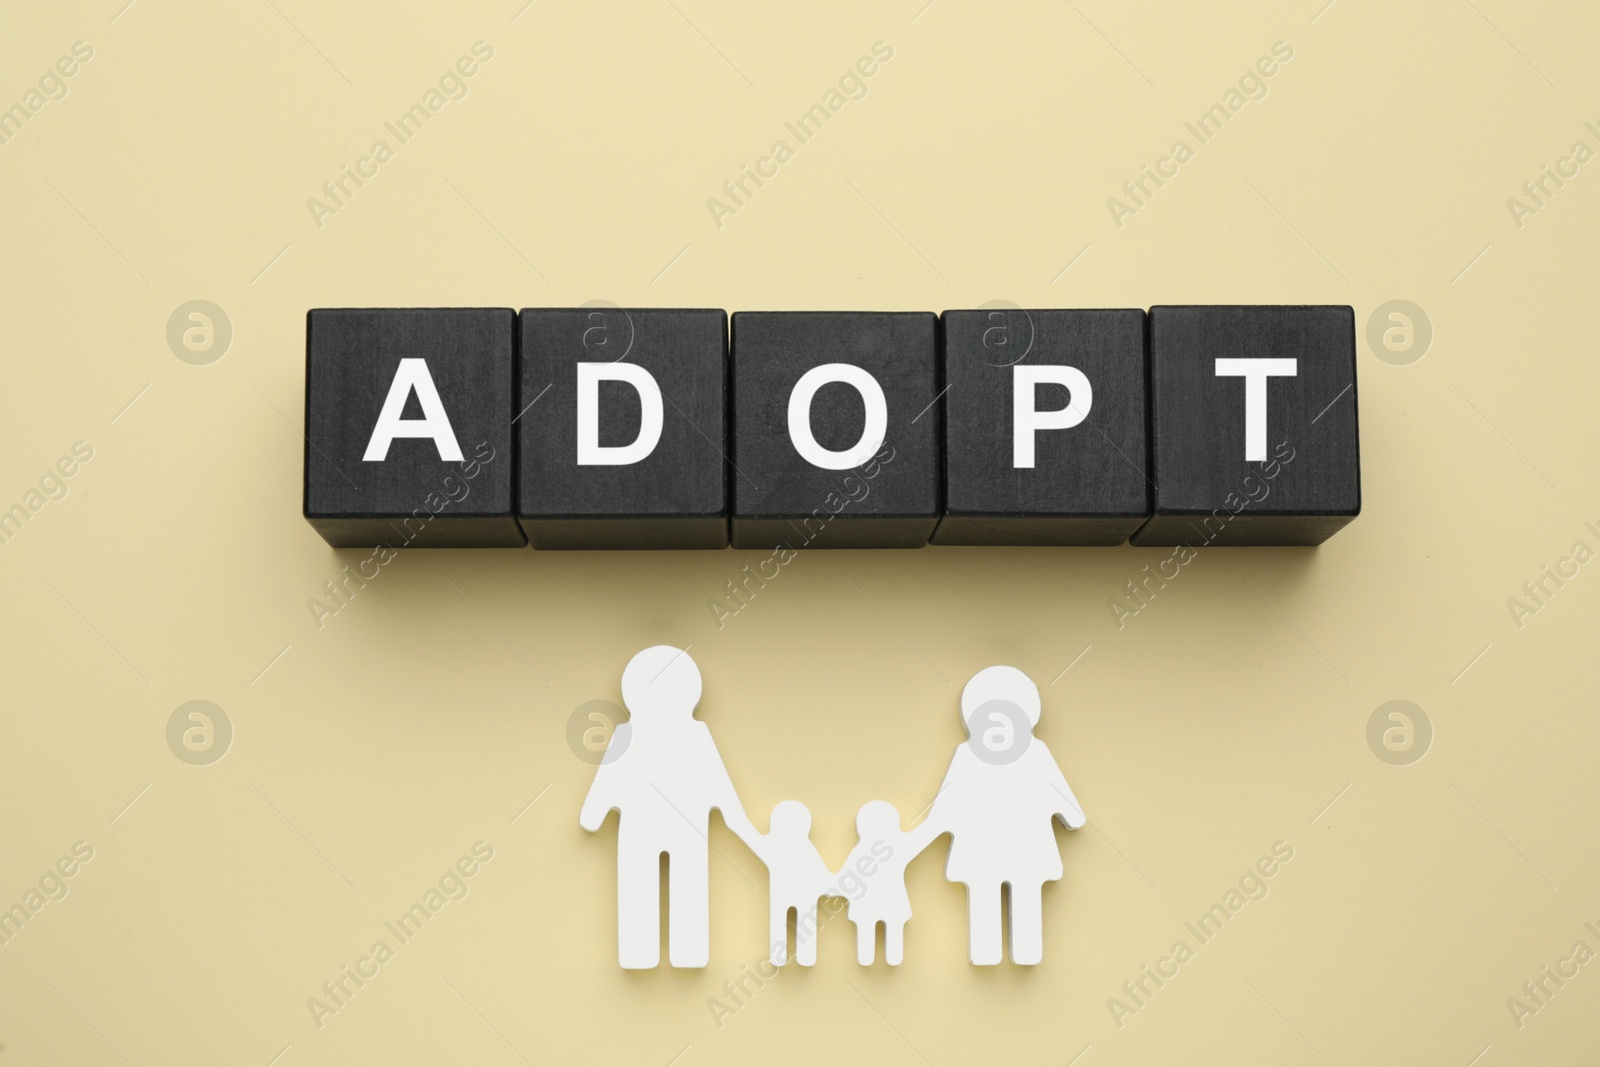 Photo of Family figure and word Adopt made of cubes on beige background, flat lay